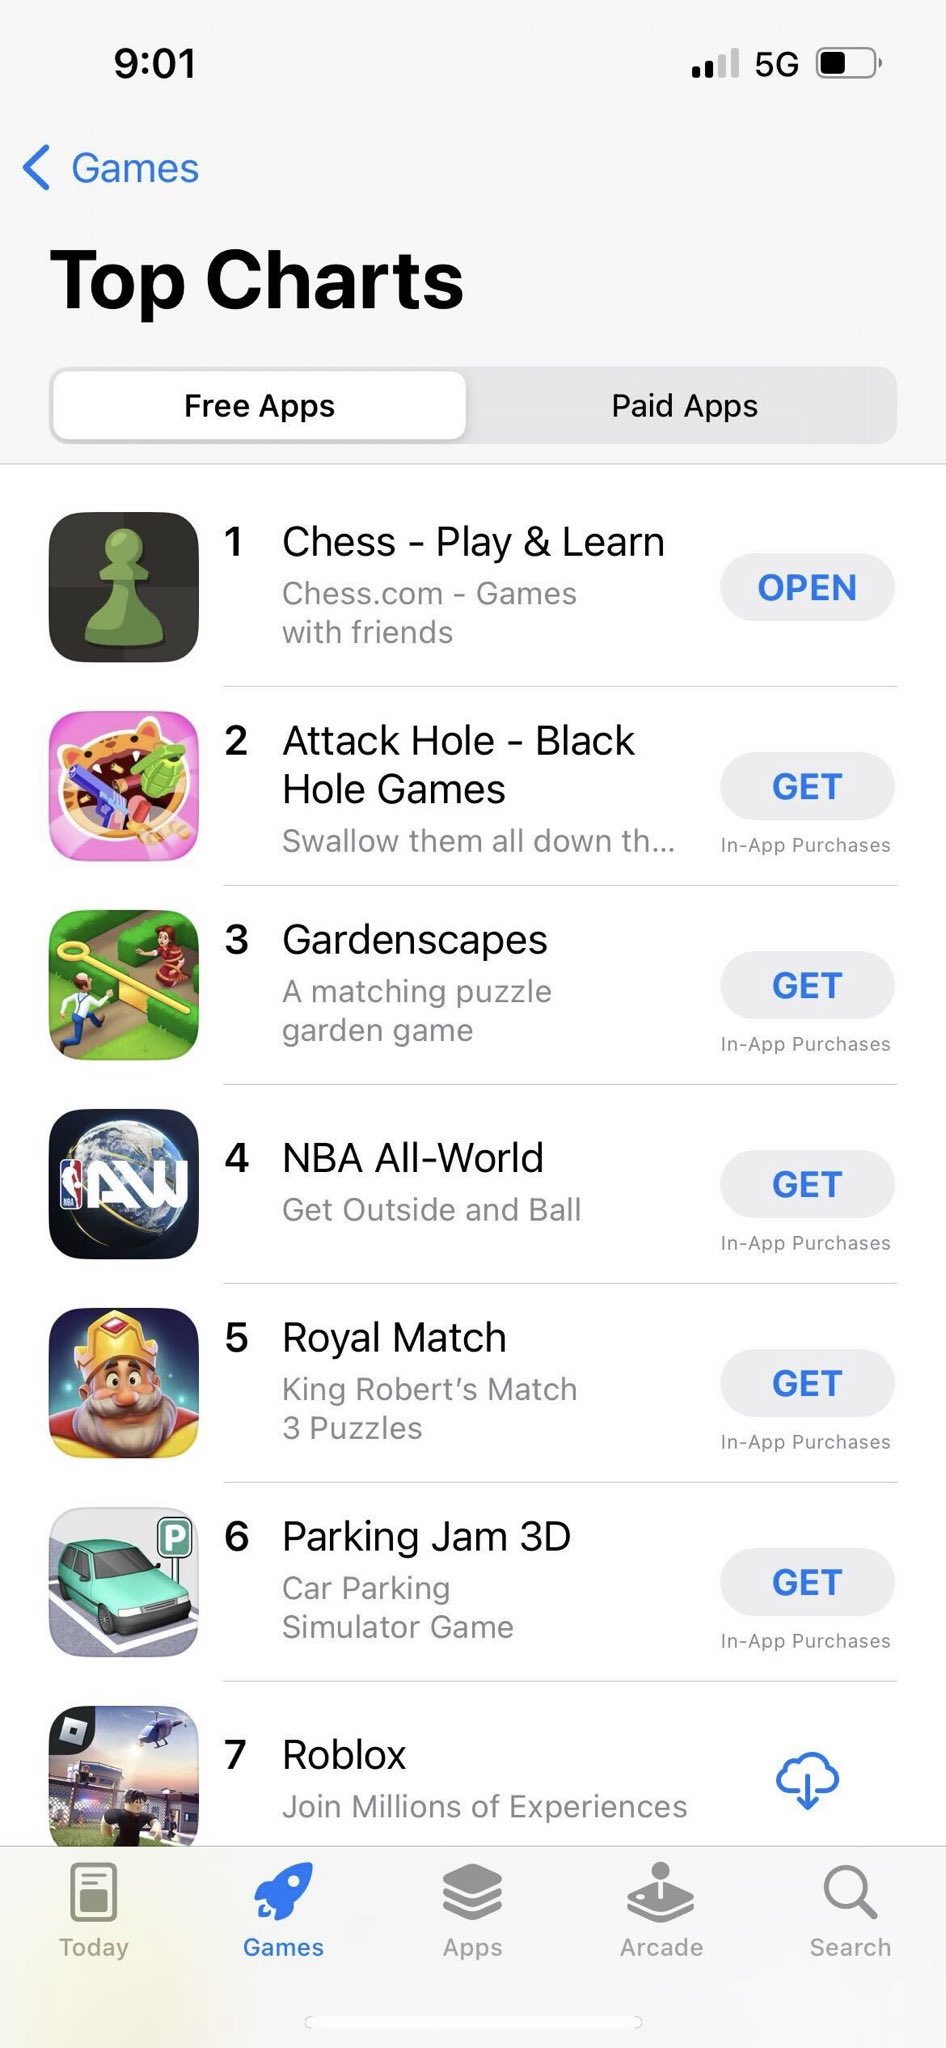 Chess.com Apps on the App Store